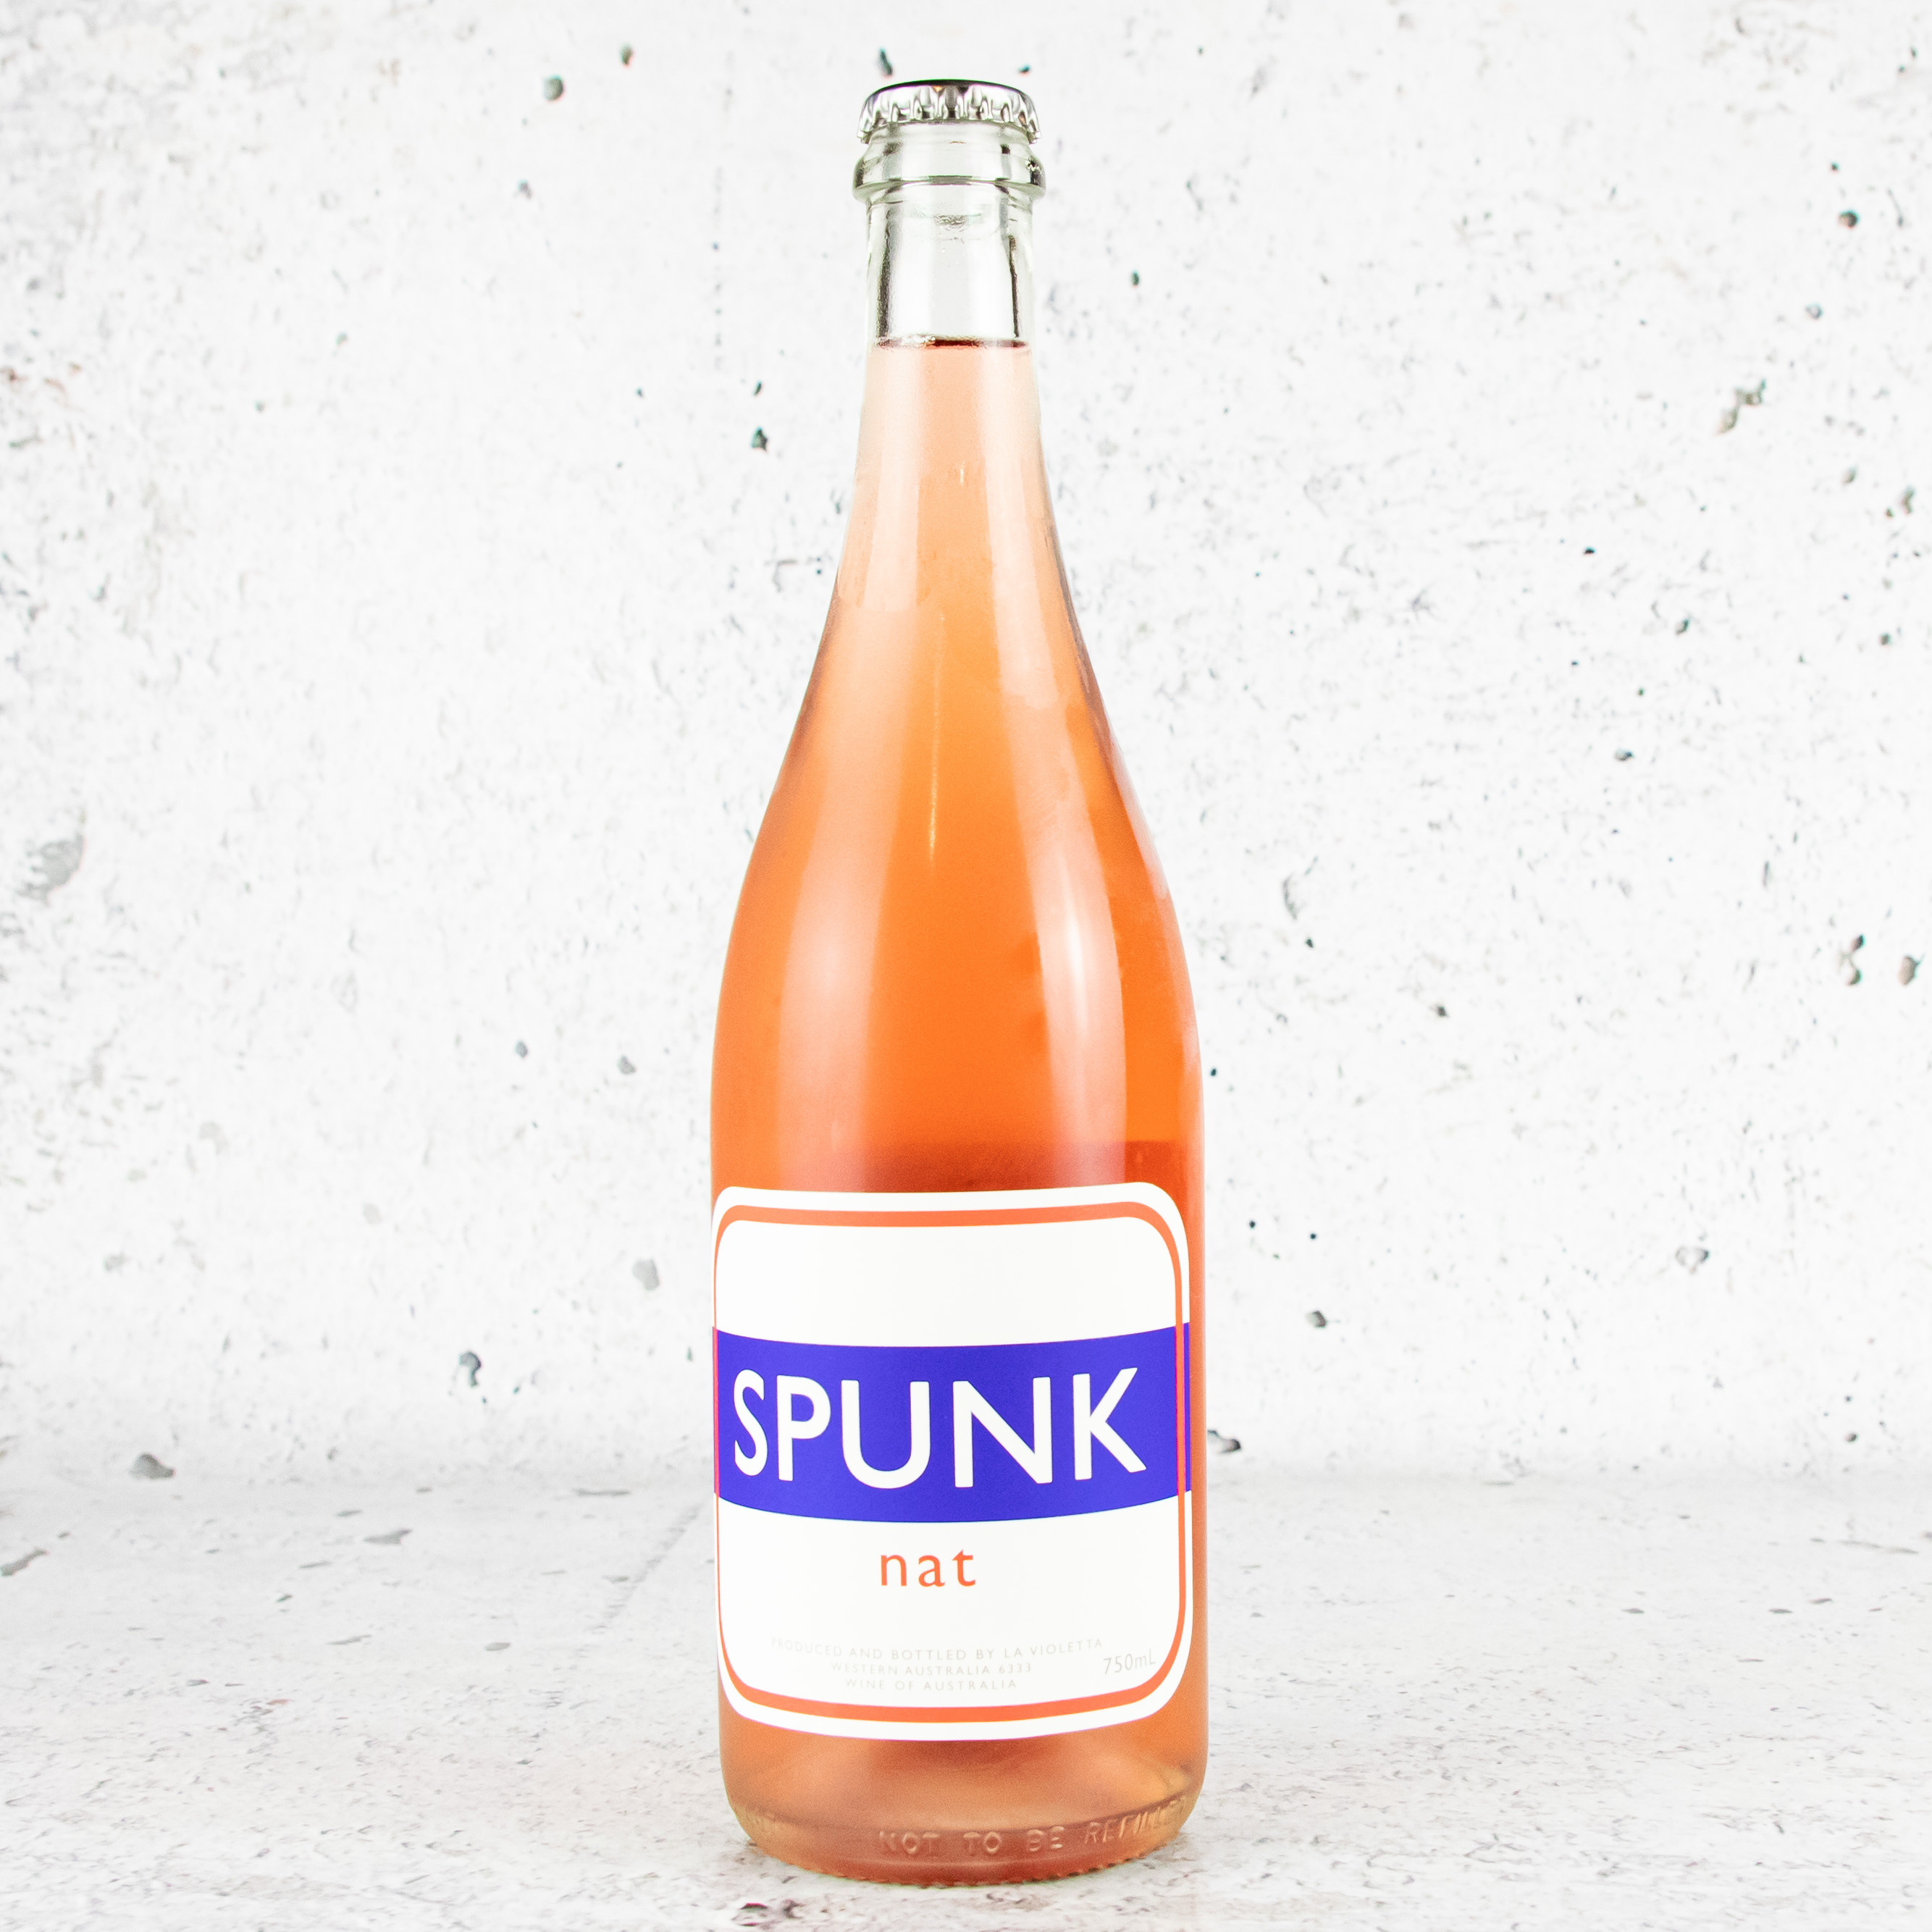 anna rina recommends spunk in a bottle pic